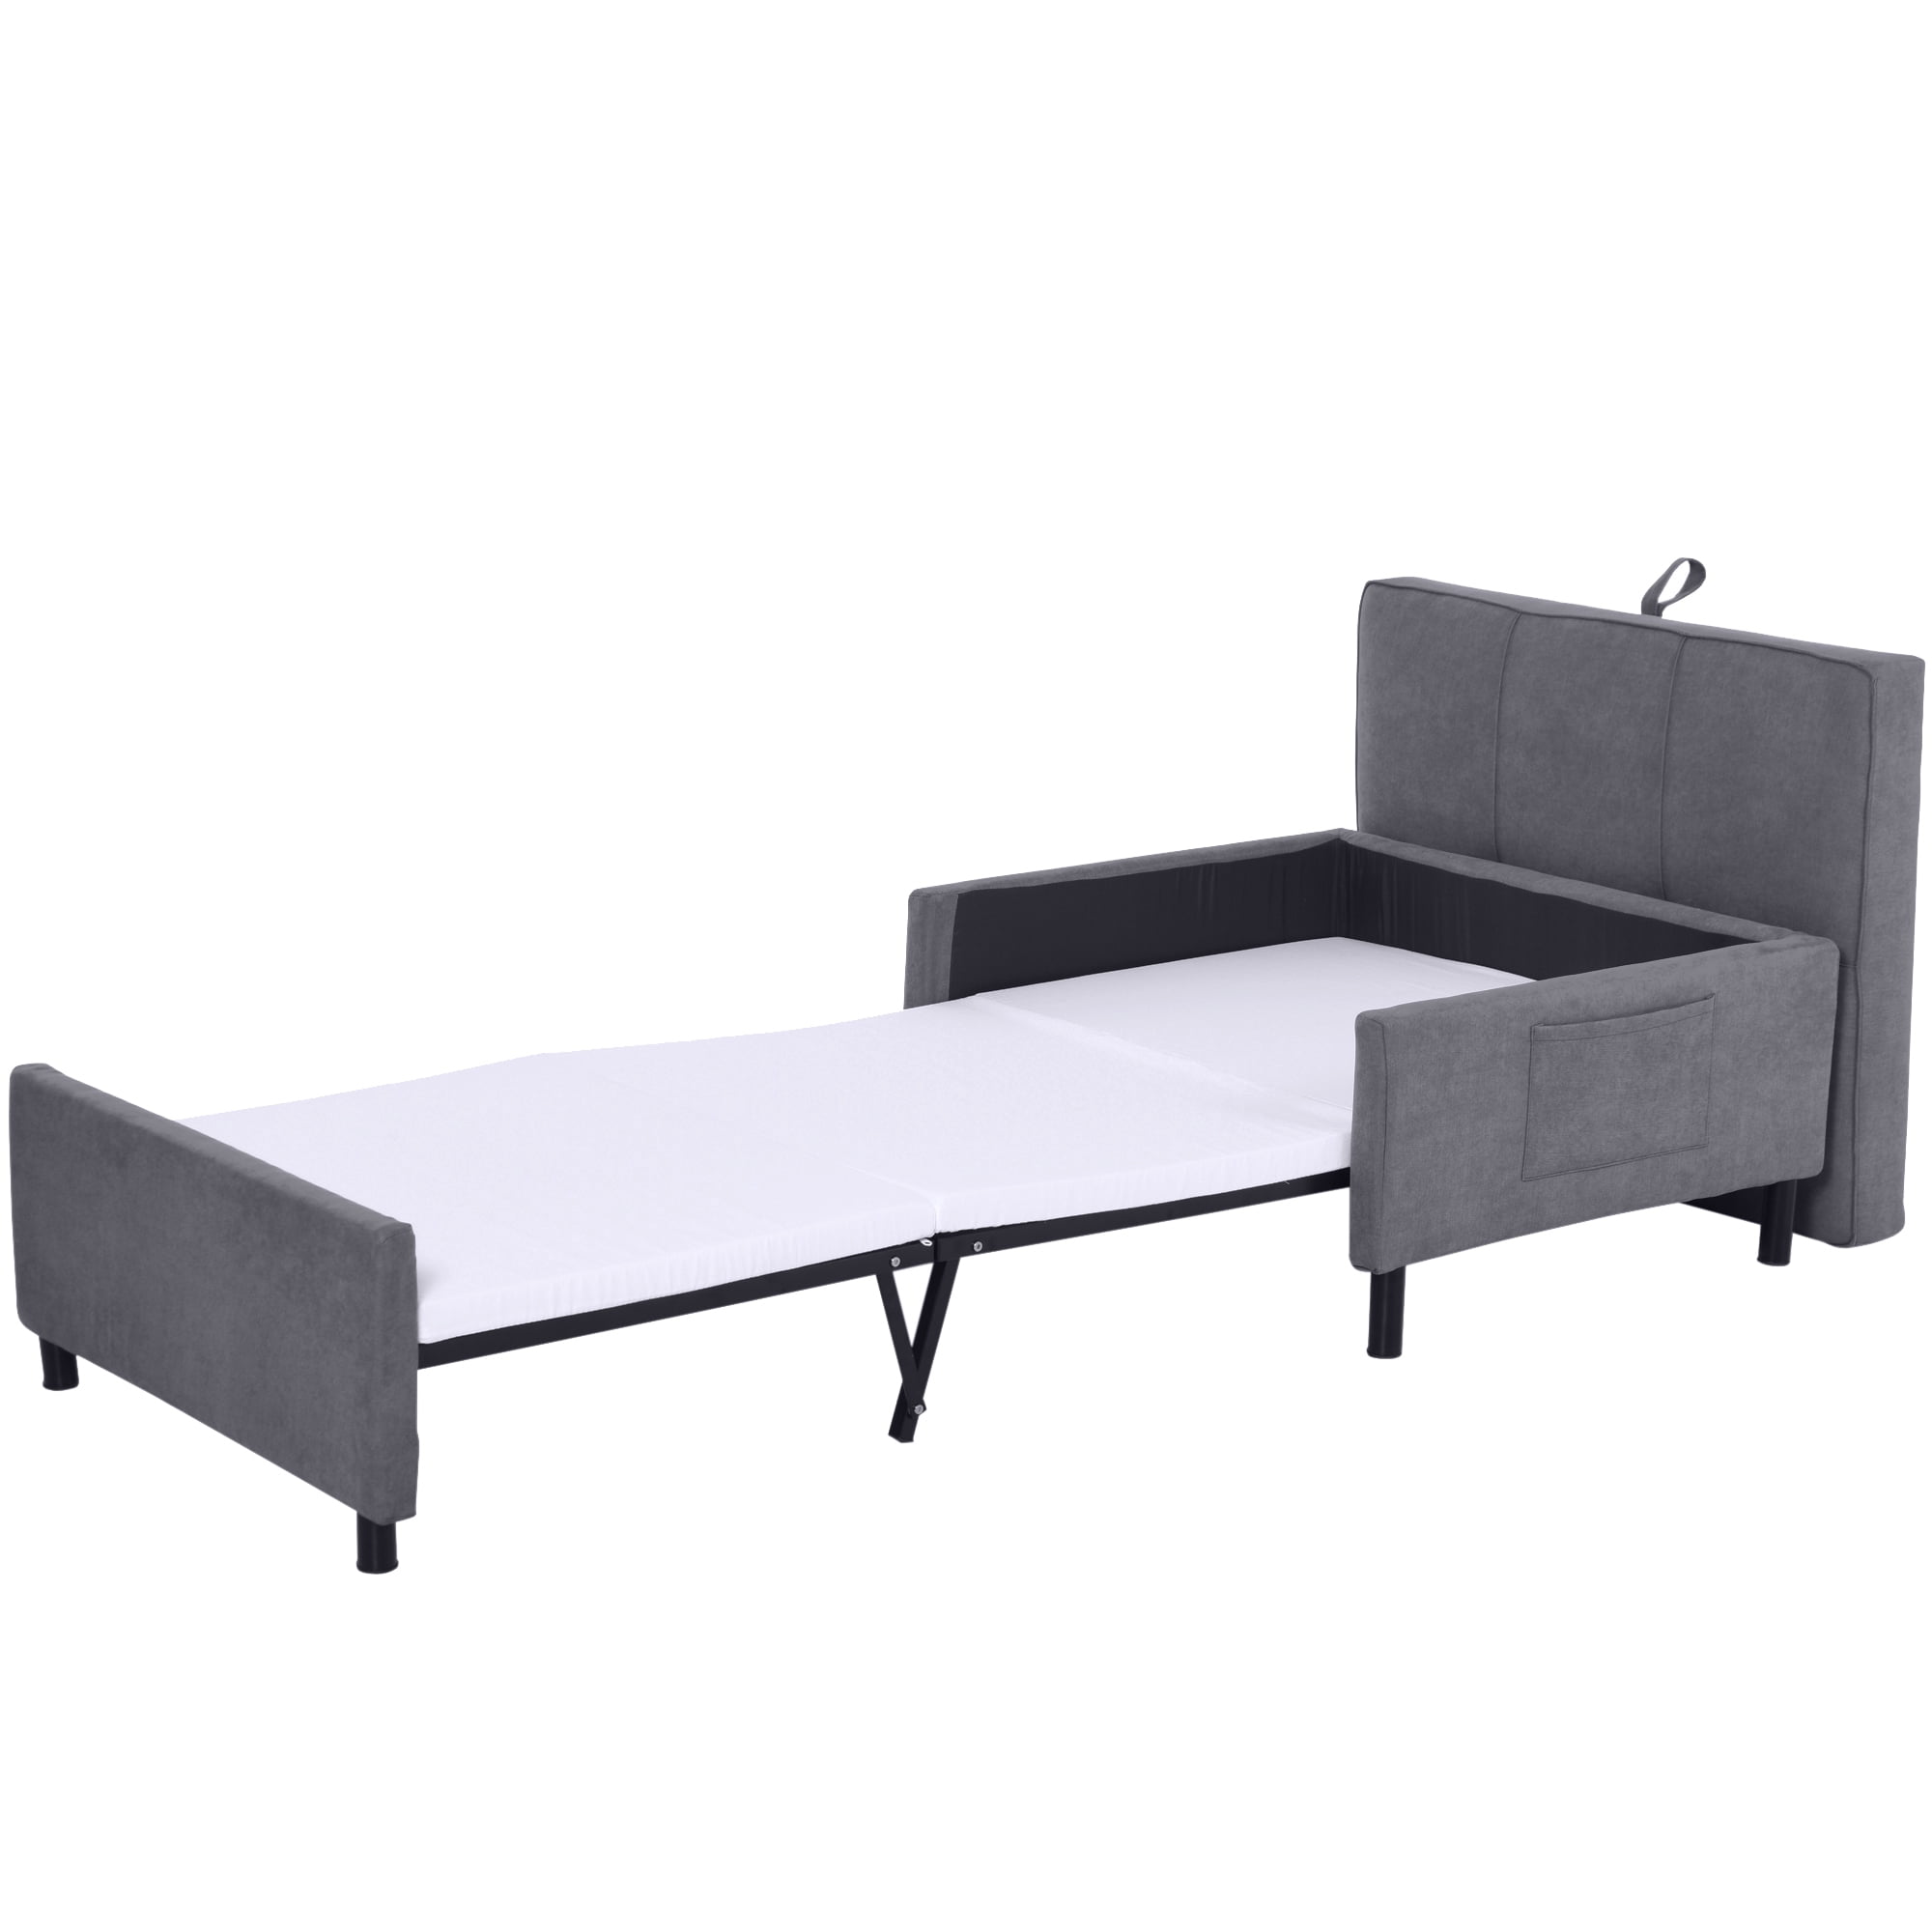 Space-Saving Padded Cushion Rest Lounger w/Steel Frame Strong Base - Walmart.com